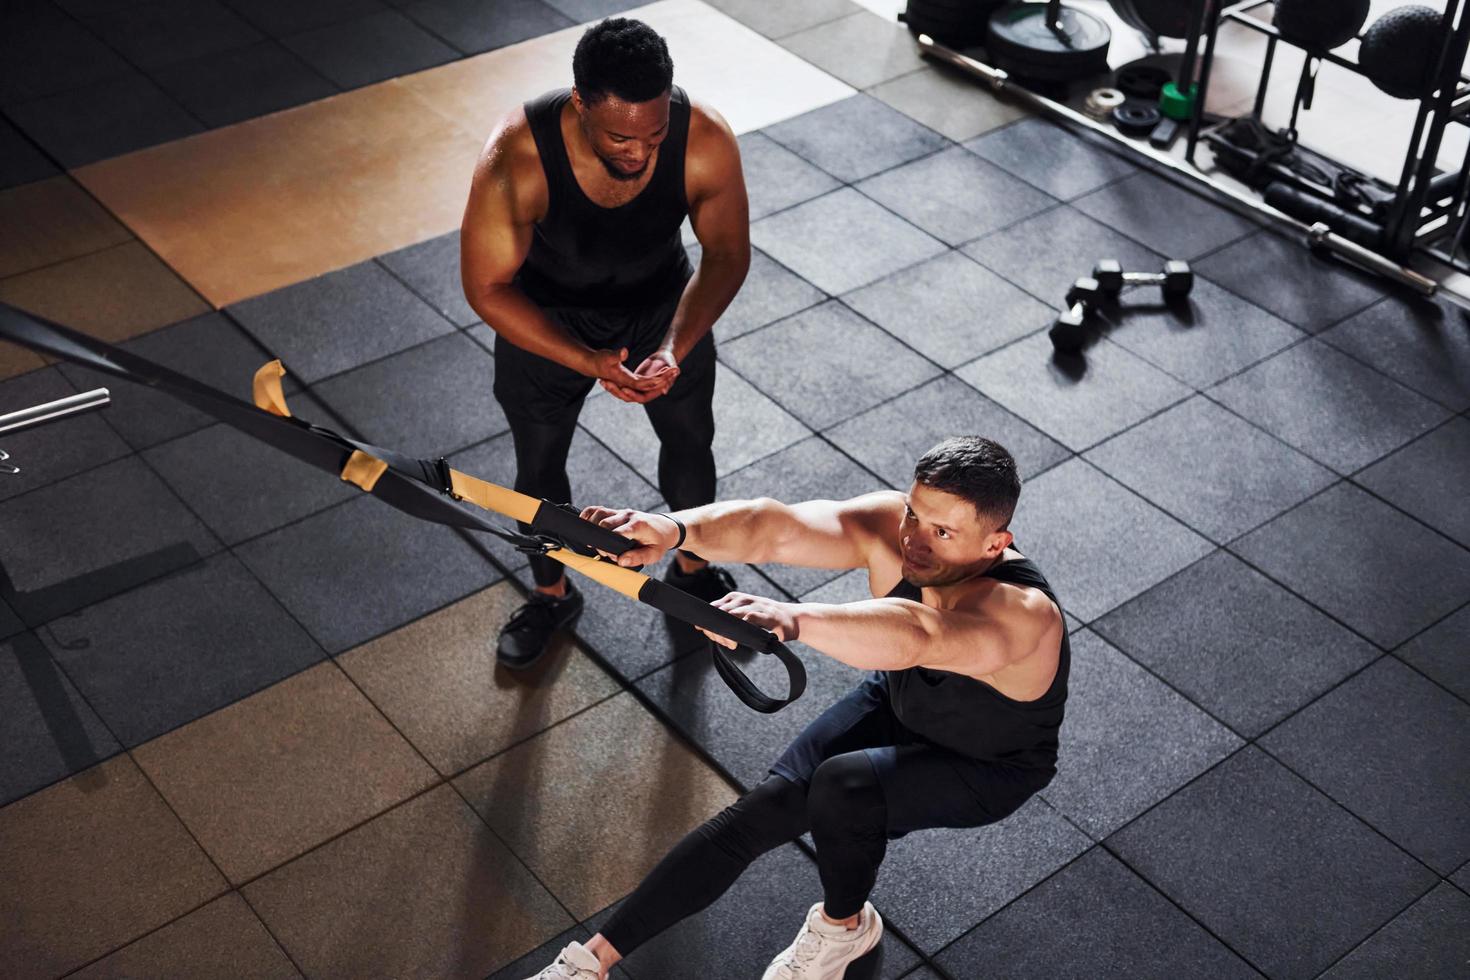 Personal trainer is on job. African american man with white guy have workout day in gym photo